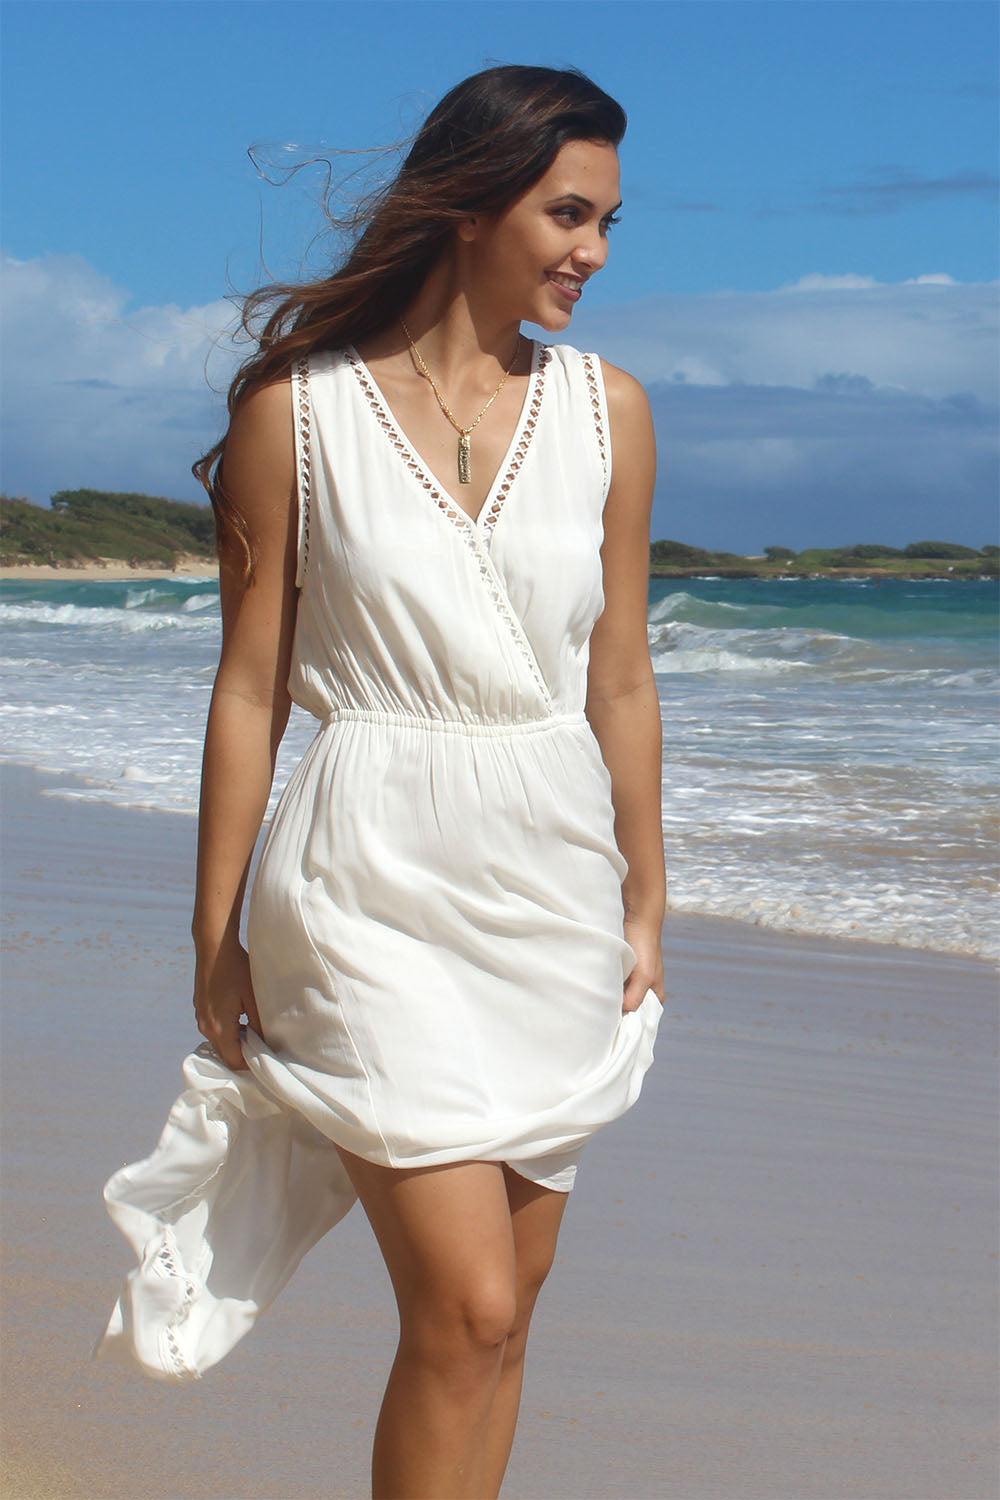 Jaqlyn taking a walk on the beach in a while Nahele dress by Angels by the Sea